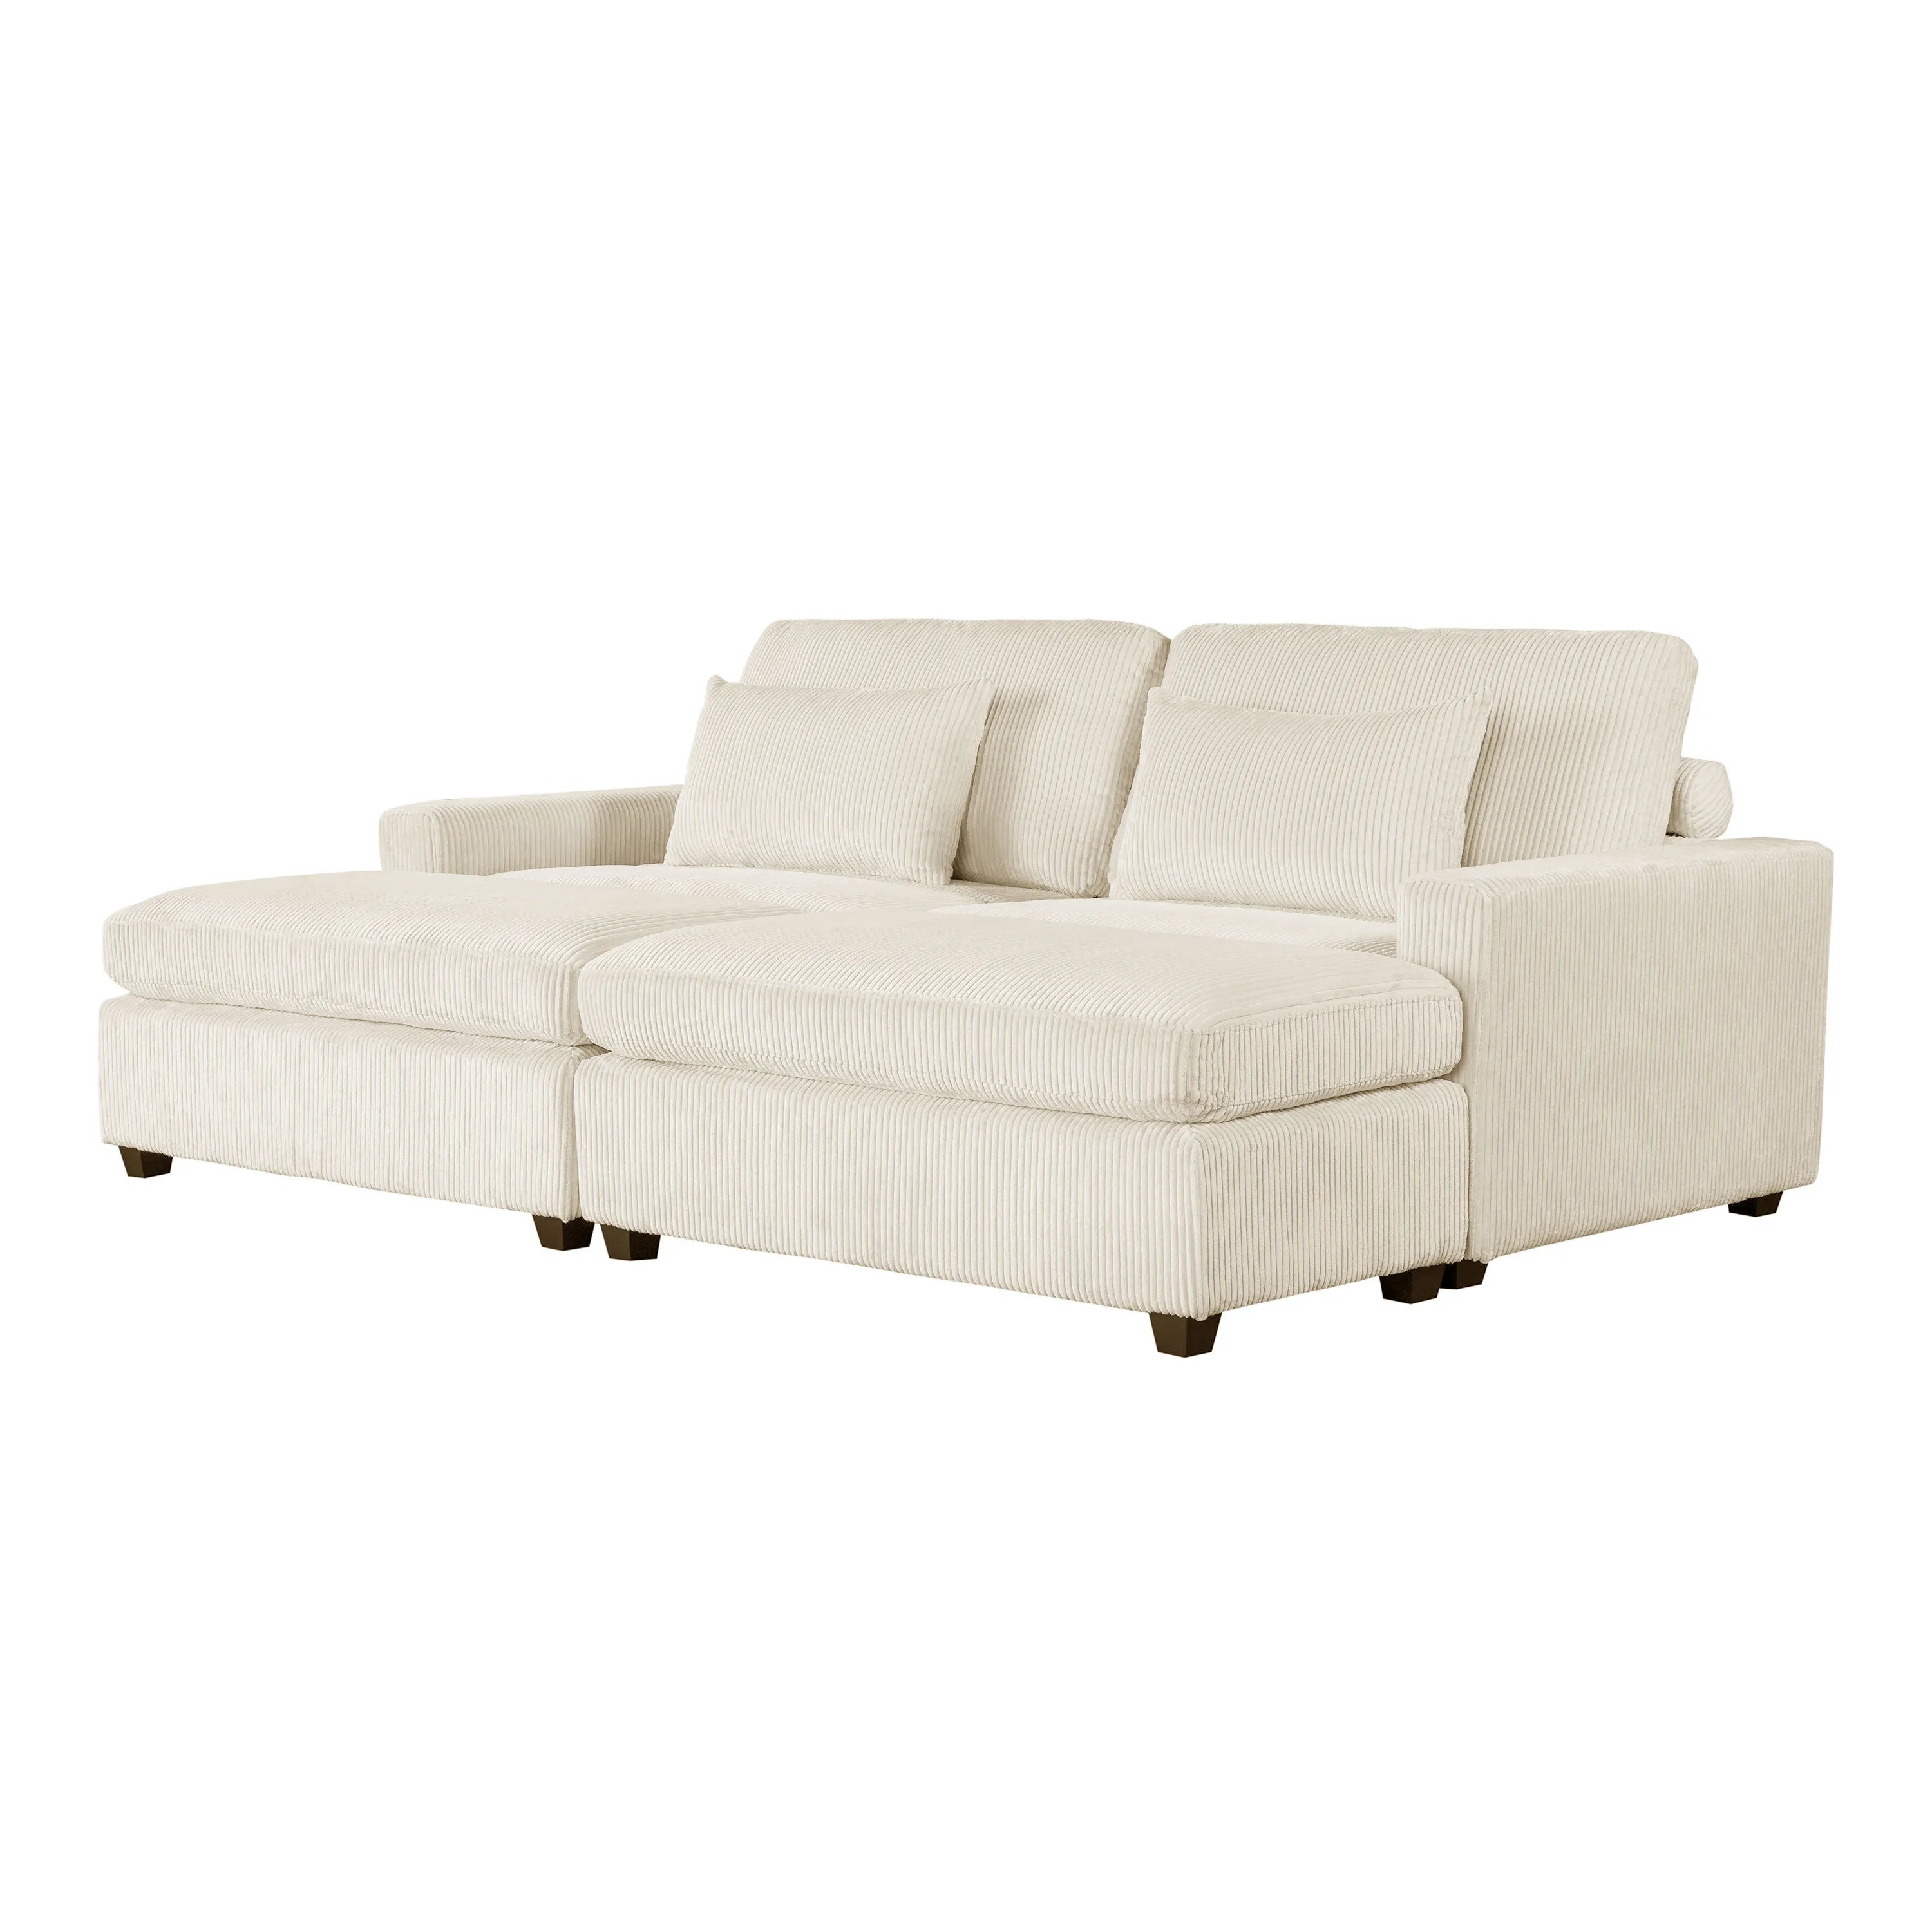 Louie Corduroy Sofa, Deep Sectional Couch with Ottoman - Beige